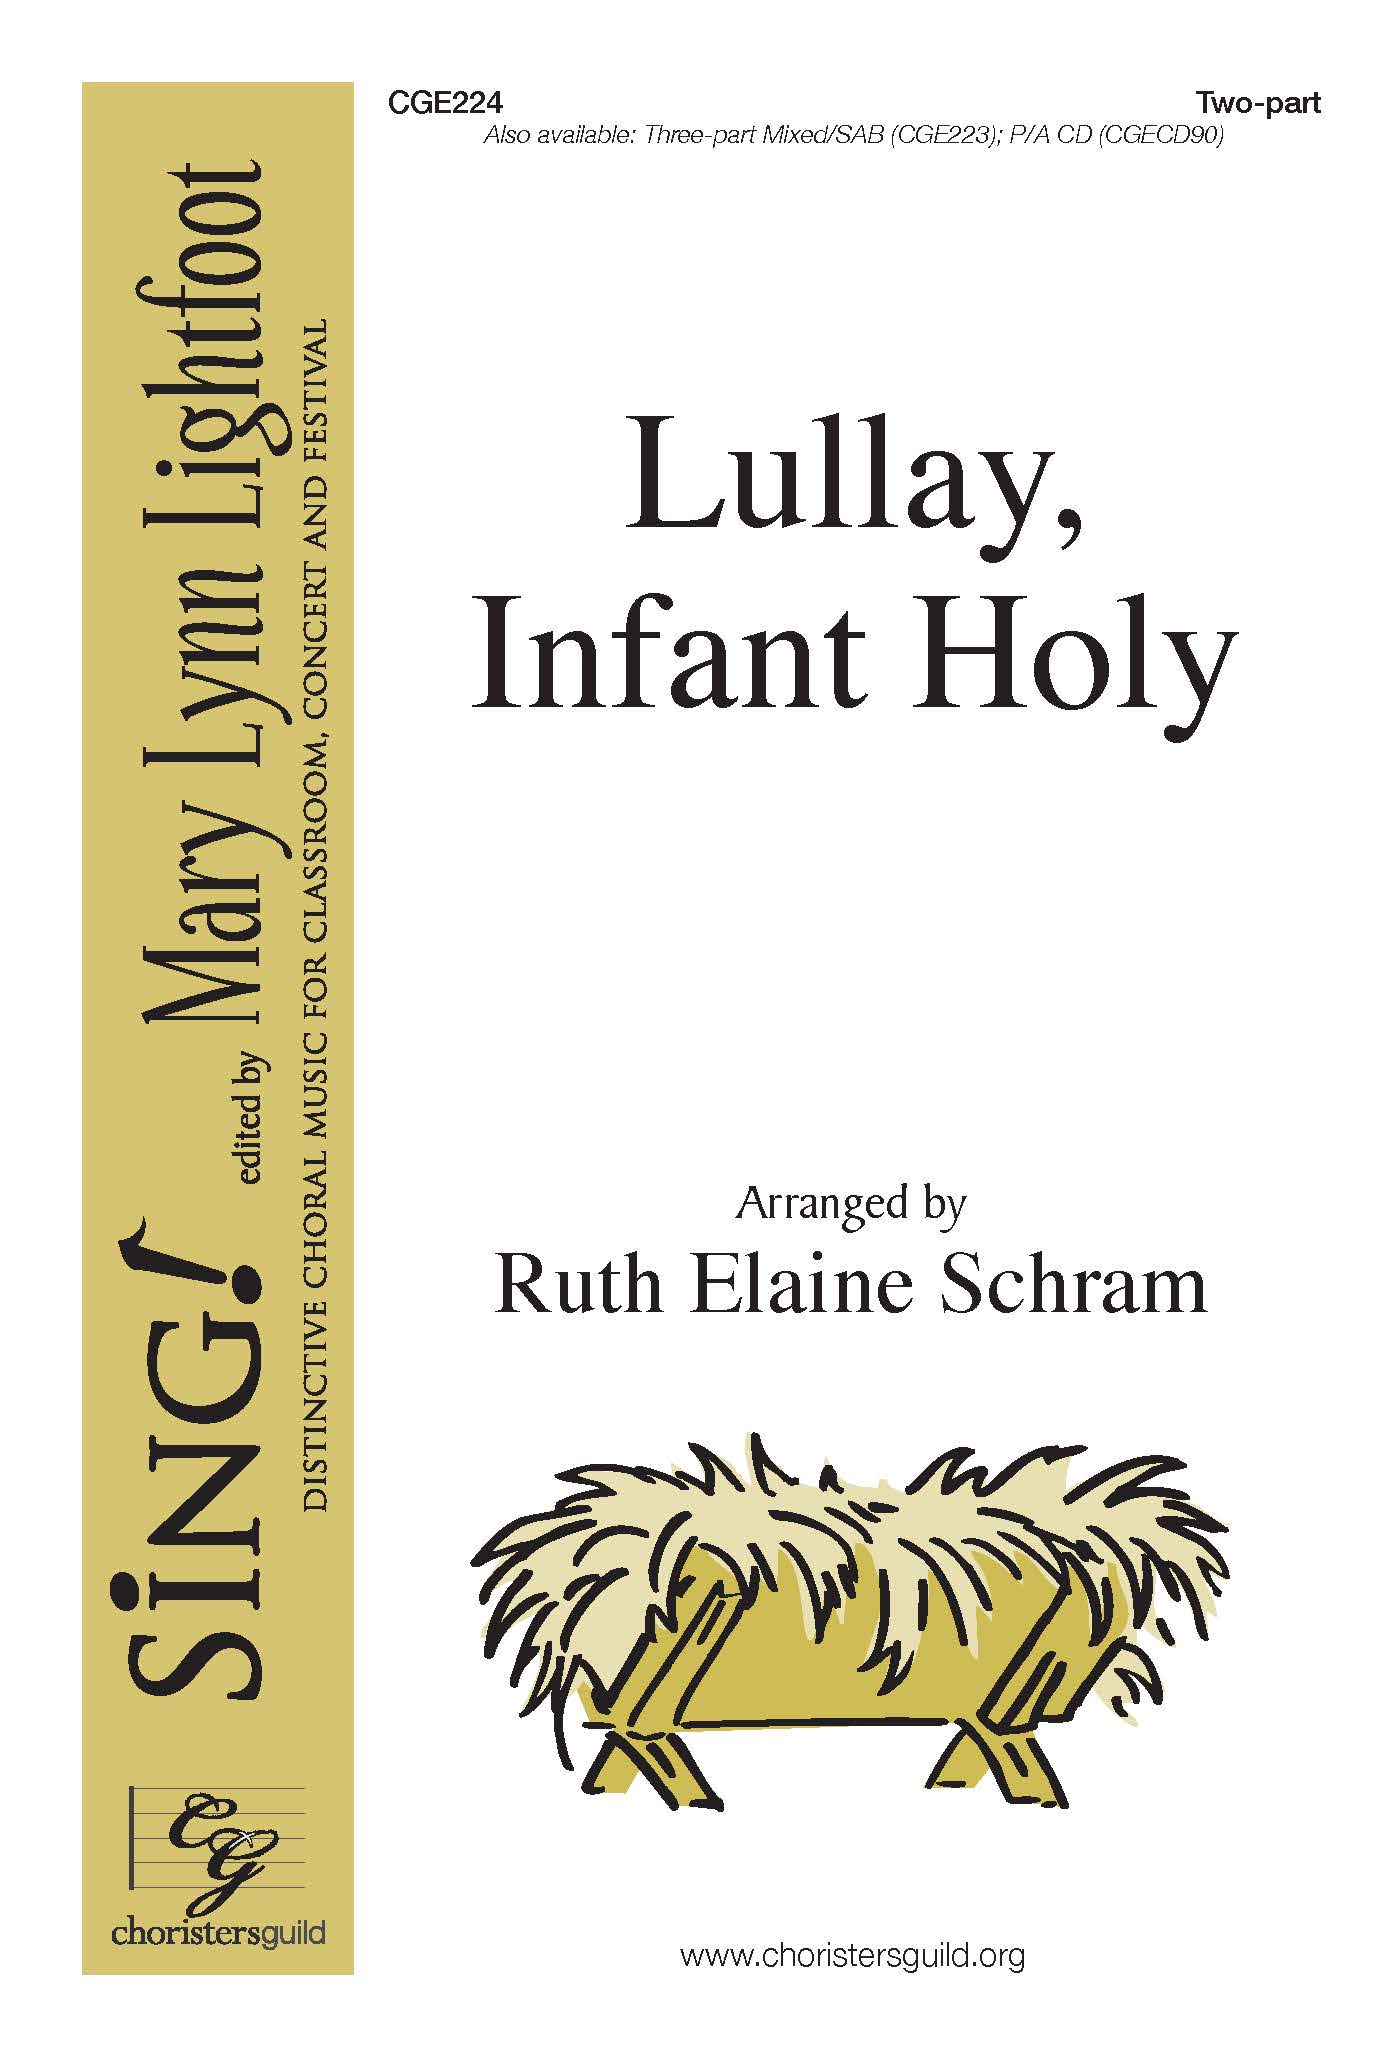 Lullay, Infant Holy Two-part